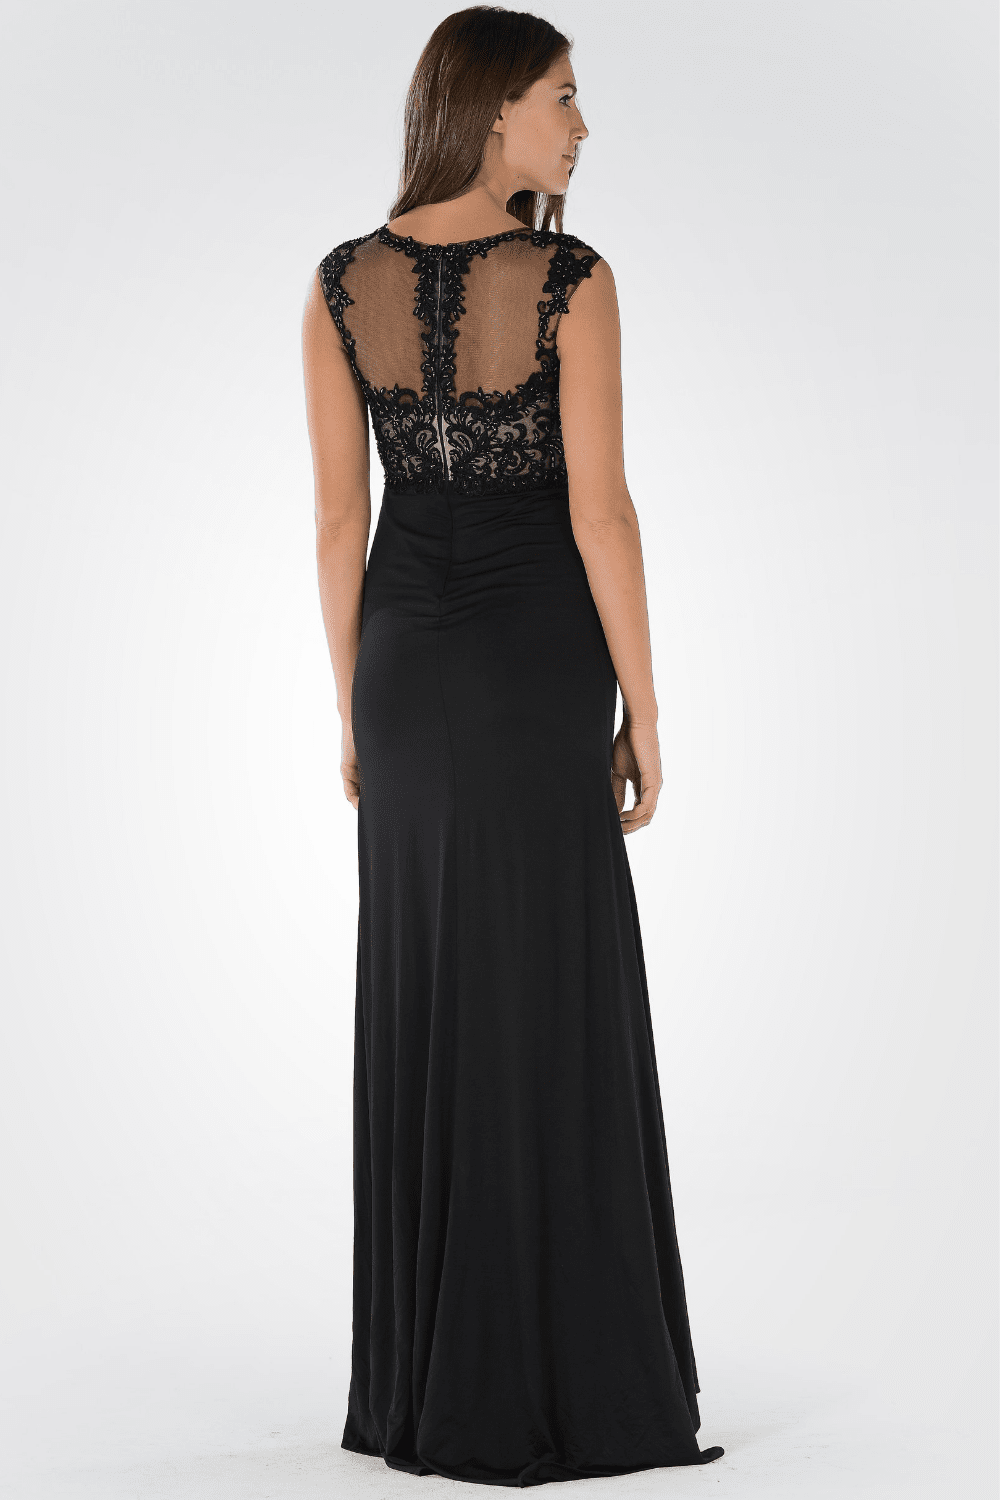 Long Dress with Illusion Lace Applique by Poly USA 7600